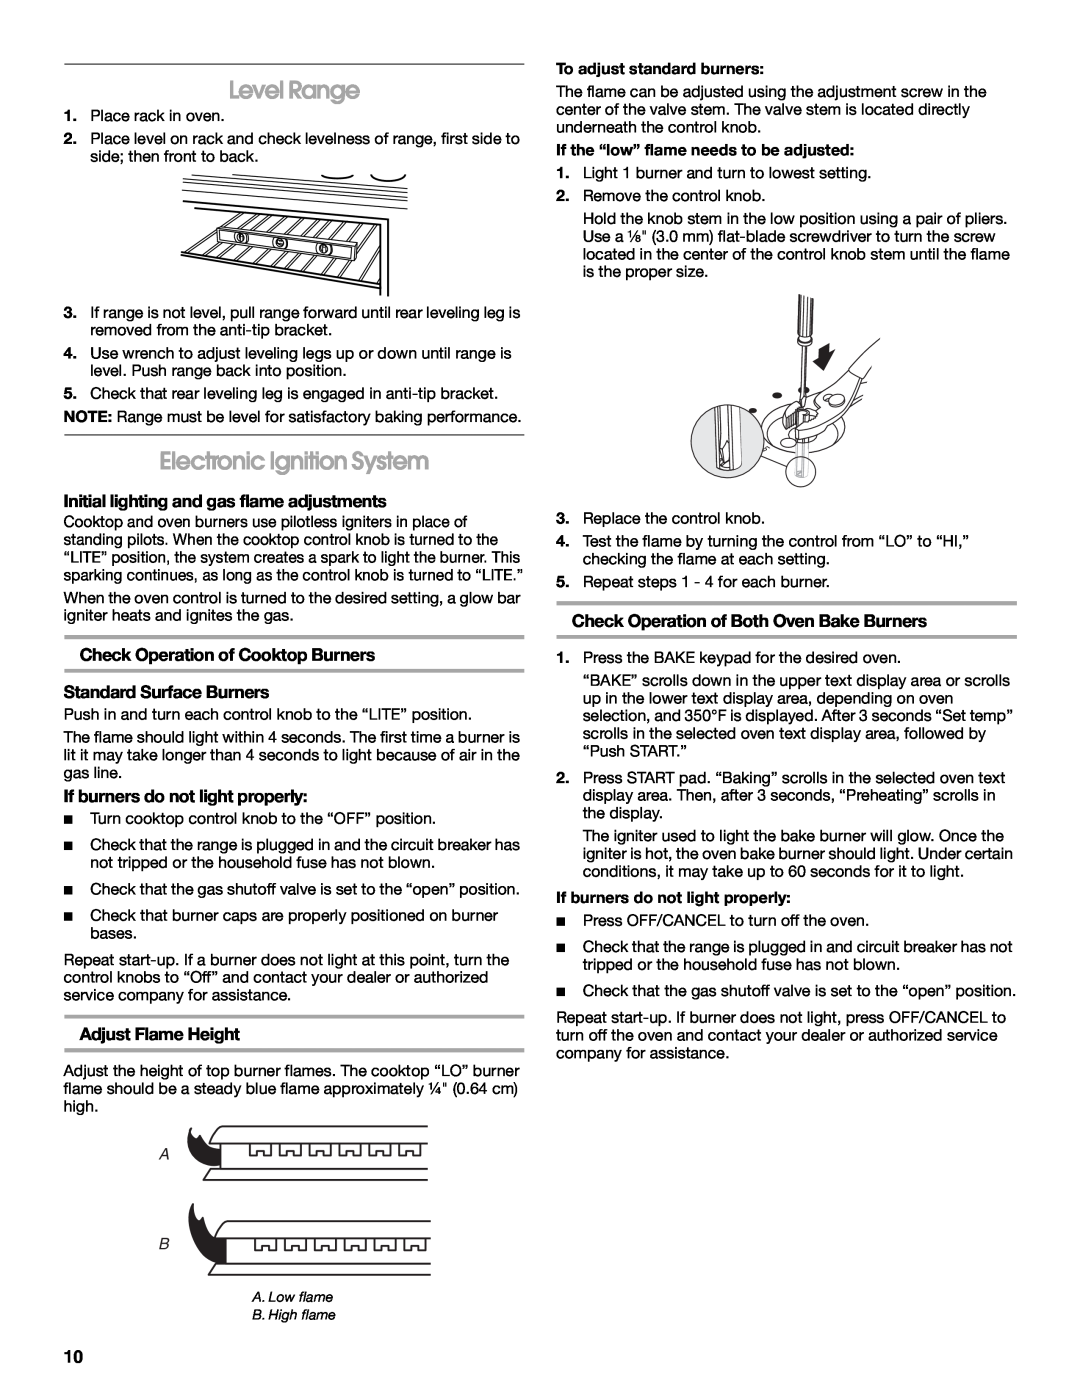 Whirlpool W10526071A Level Range, Electronic Ignition System, Initial lighting and gas flame adjustments 